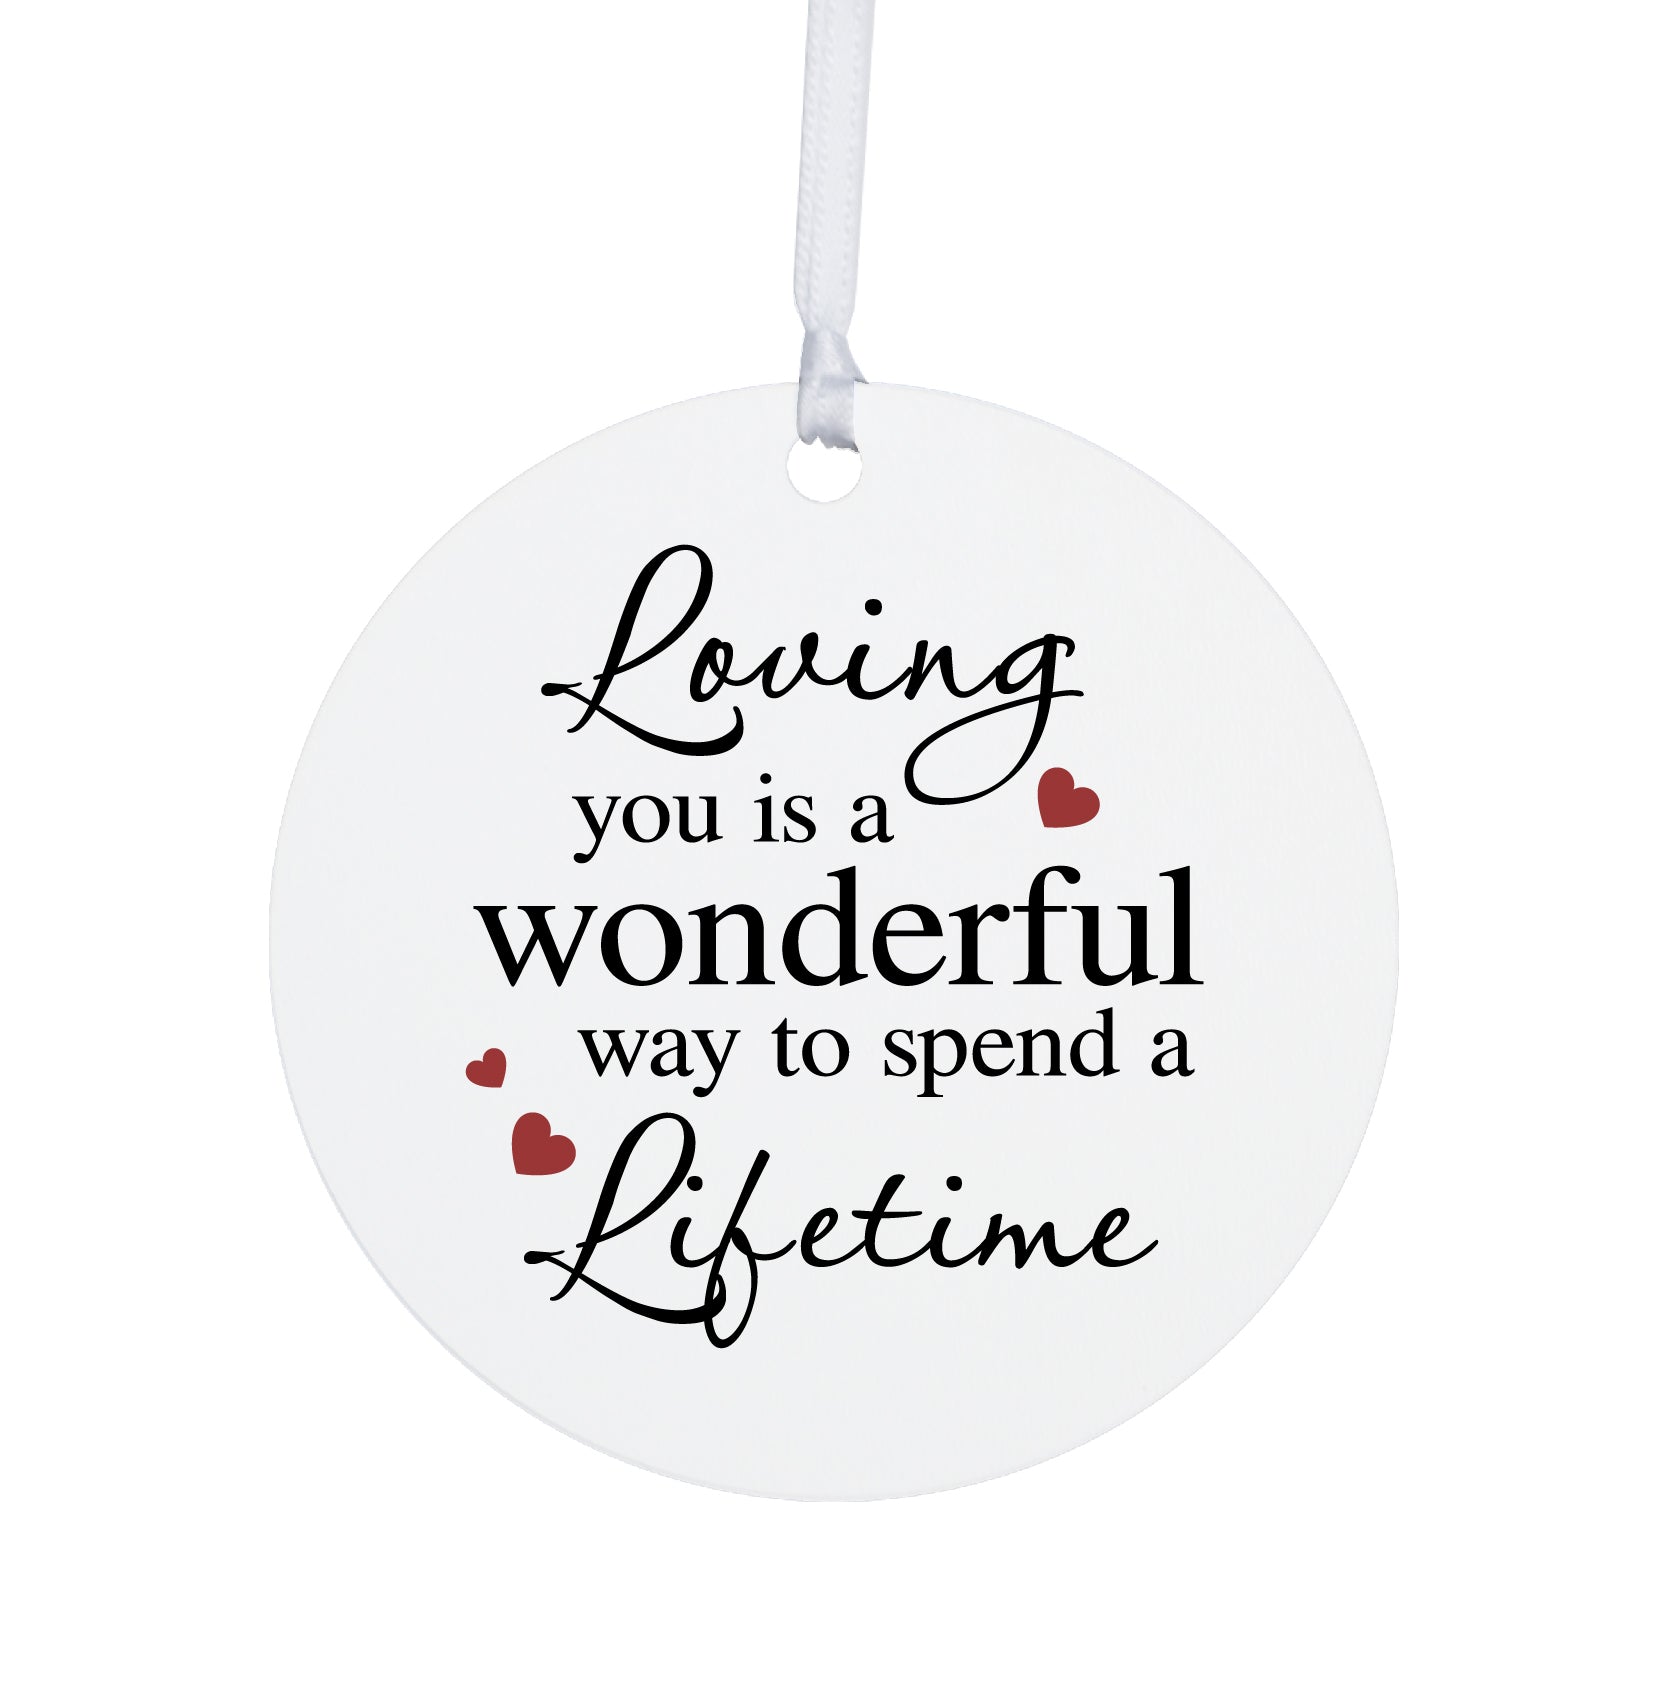 Husband / Boyfriend White Ornament With Inspirational Message Gift Ideas - Loving You Is A Wonderful Way - LifeSong Milestones